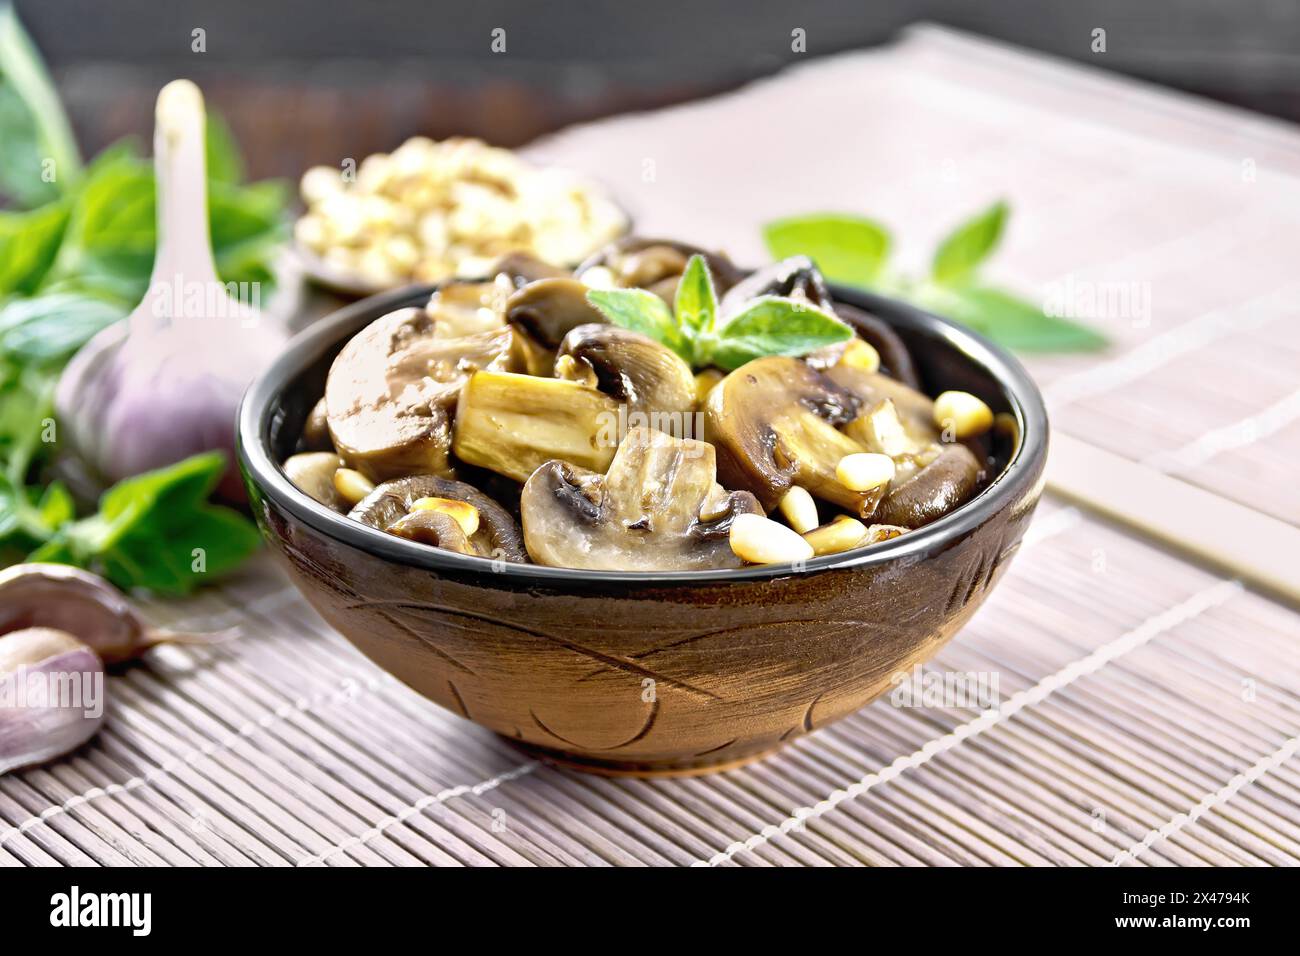 Champignons baked with oregano, wine, garlic, lemon and pine nuts in bowl on brown bamboo napkin on wooden board background Stock Photo